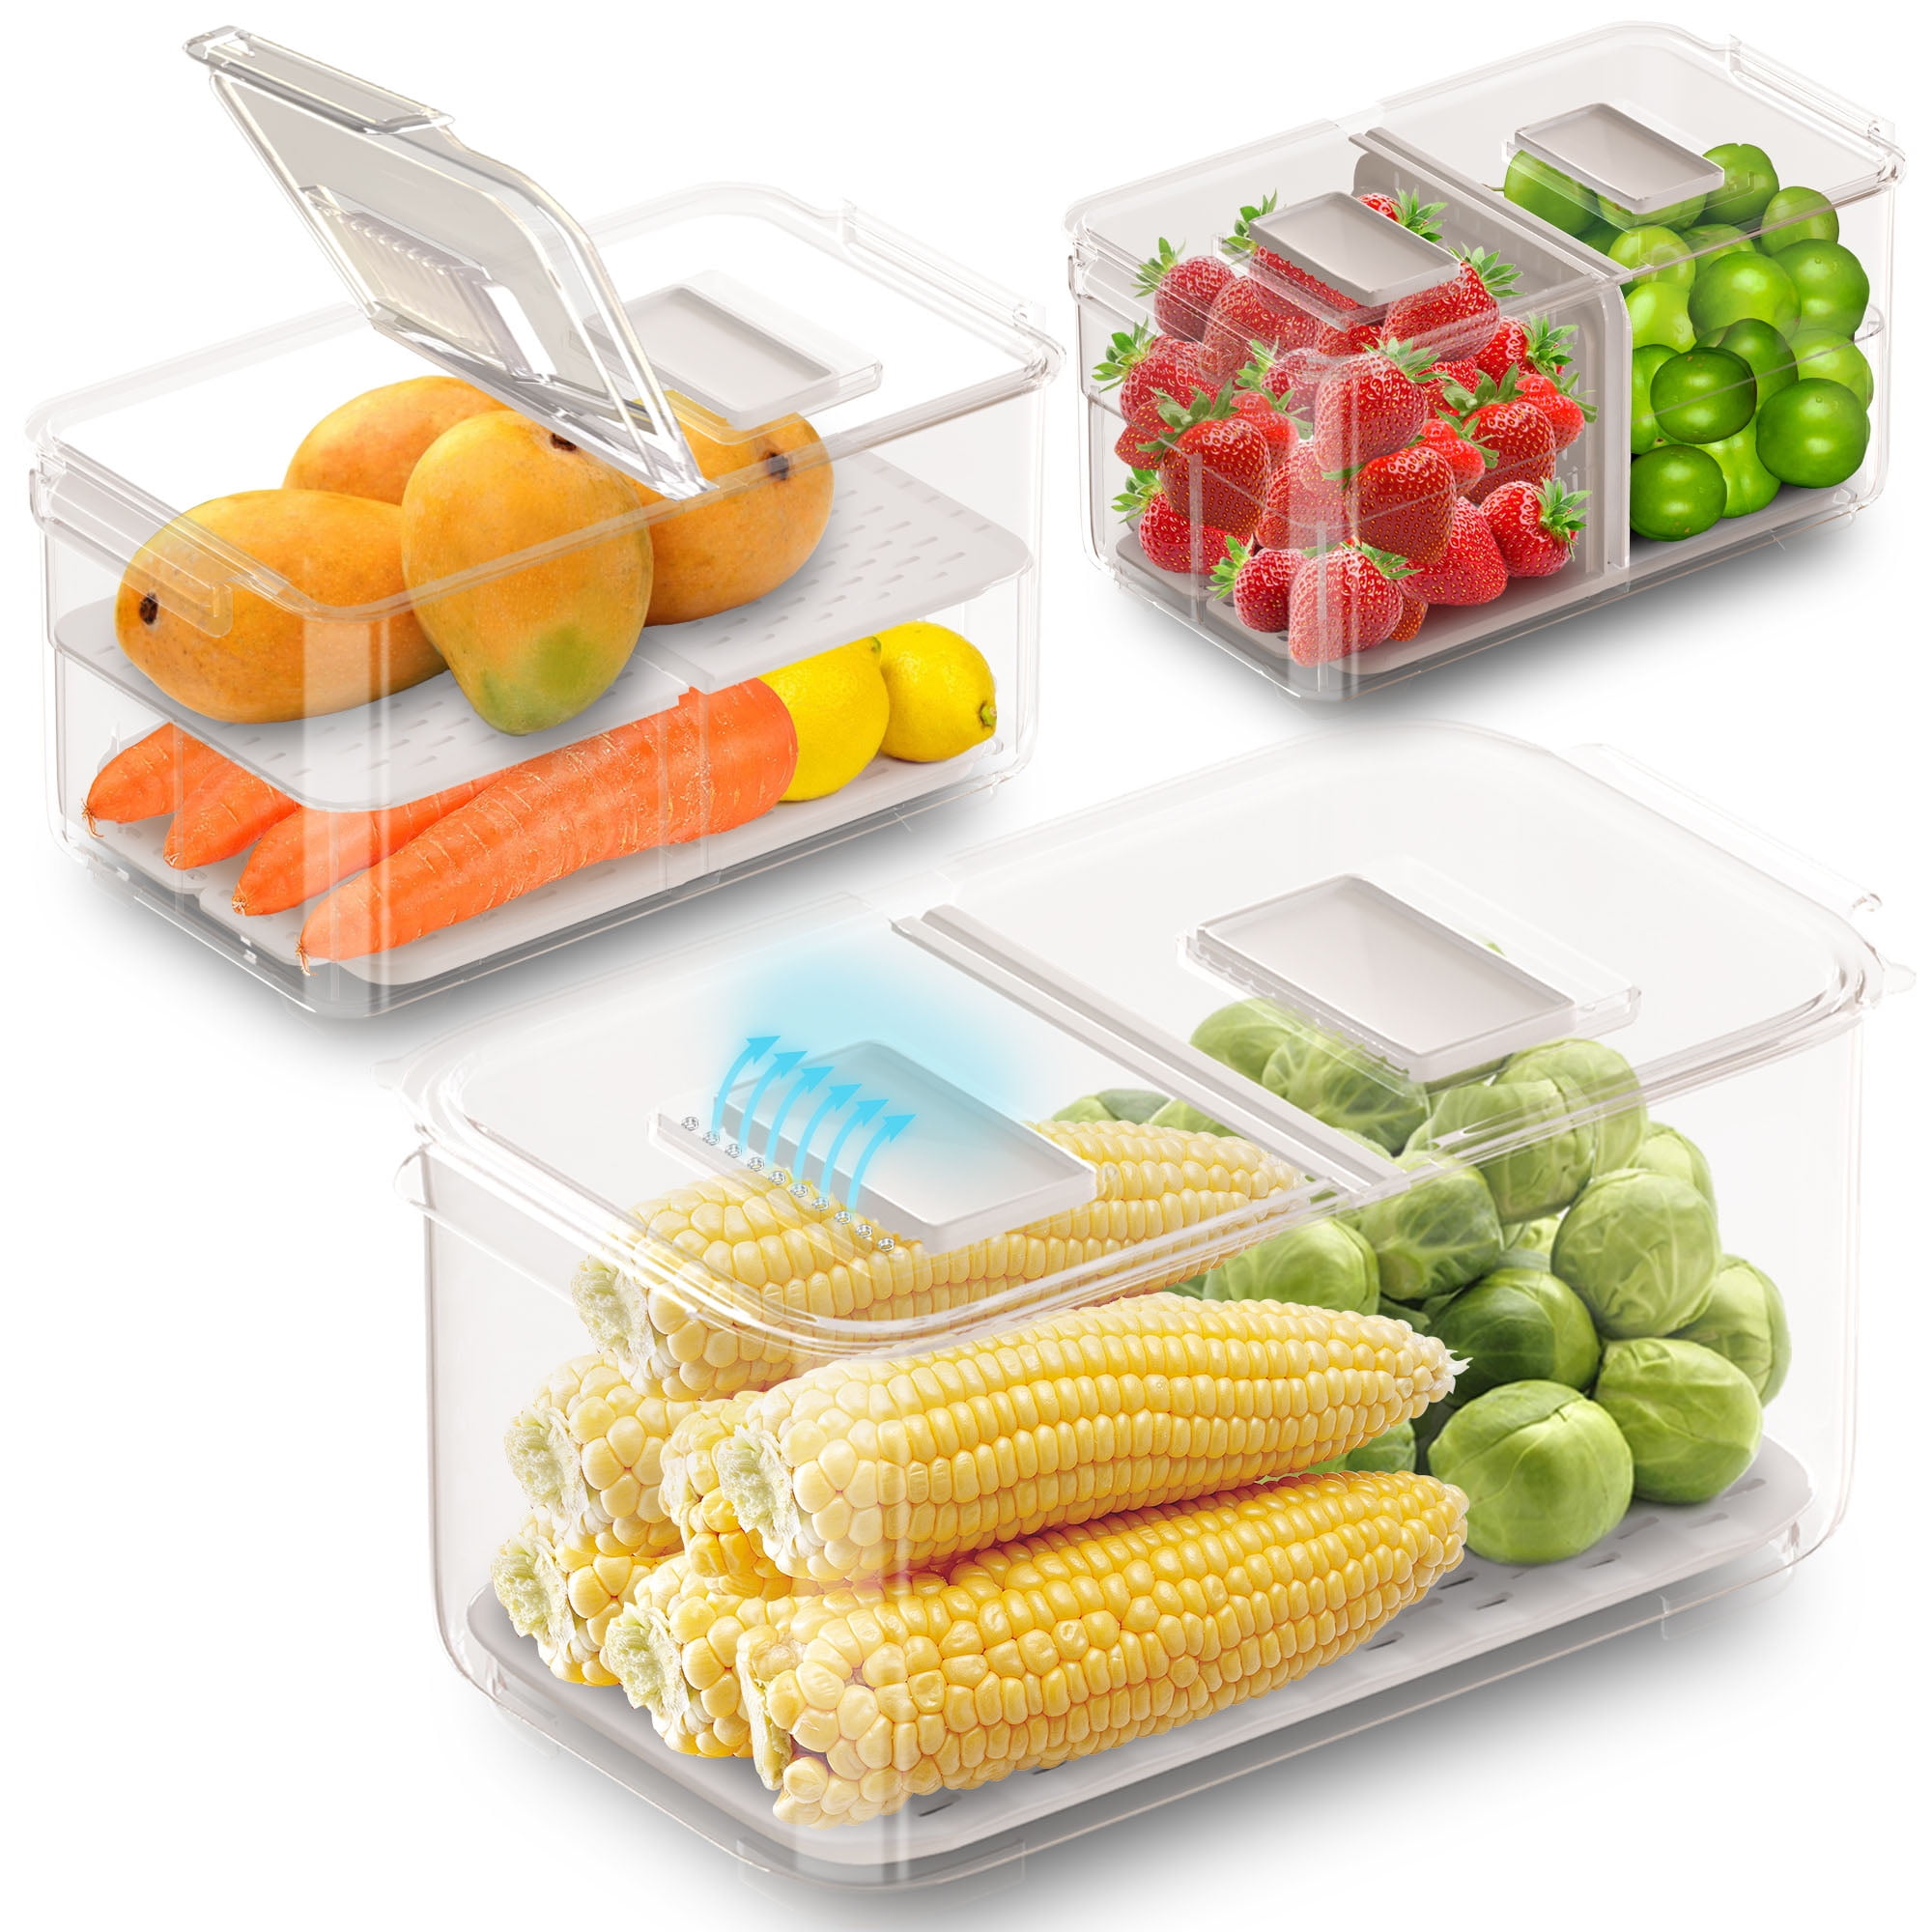 WAVELUX Produce Saver Containers for Refrigerator, Food Fruit Vegetables  Storage, 3Pcs Stackable Fridge Organizer, Fresh Keeper Drawer Bin Basket  with Vented Lids , Removable Drain Tray & Folding Lid… 